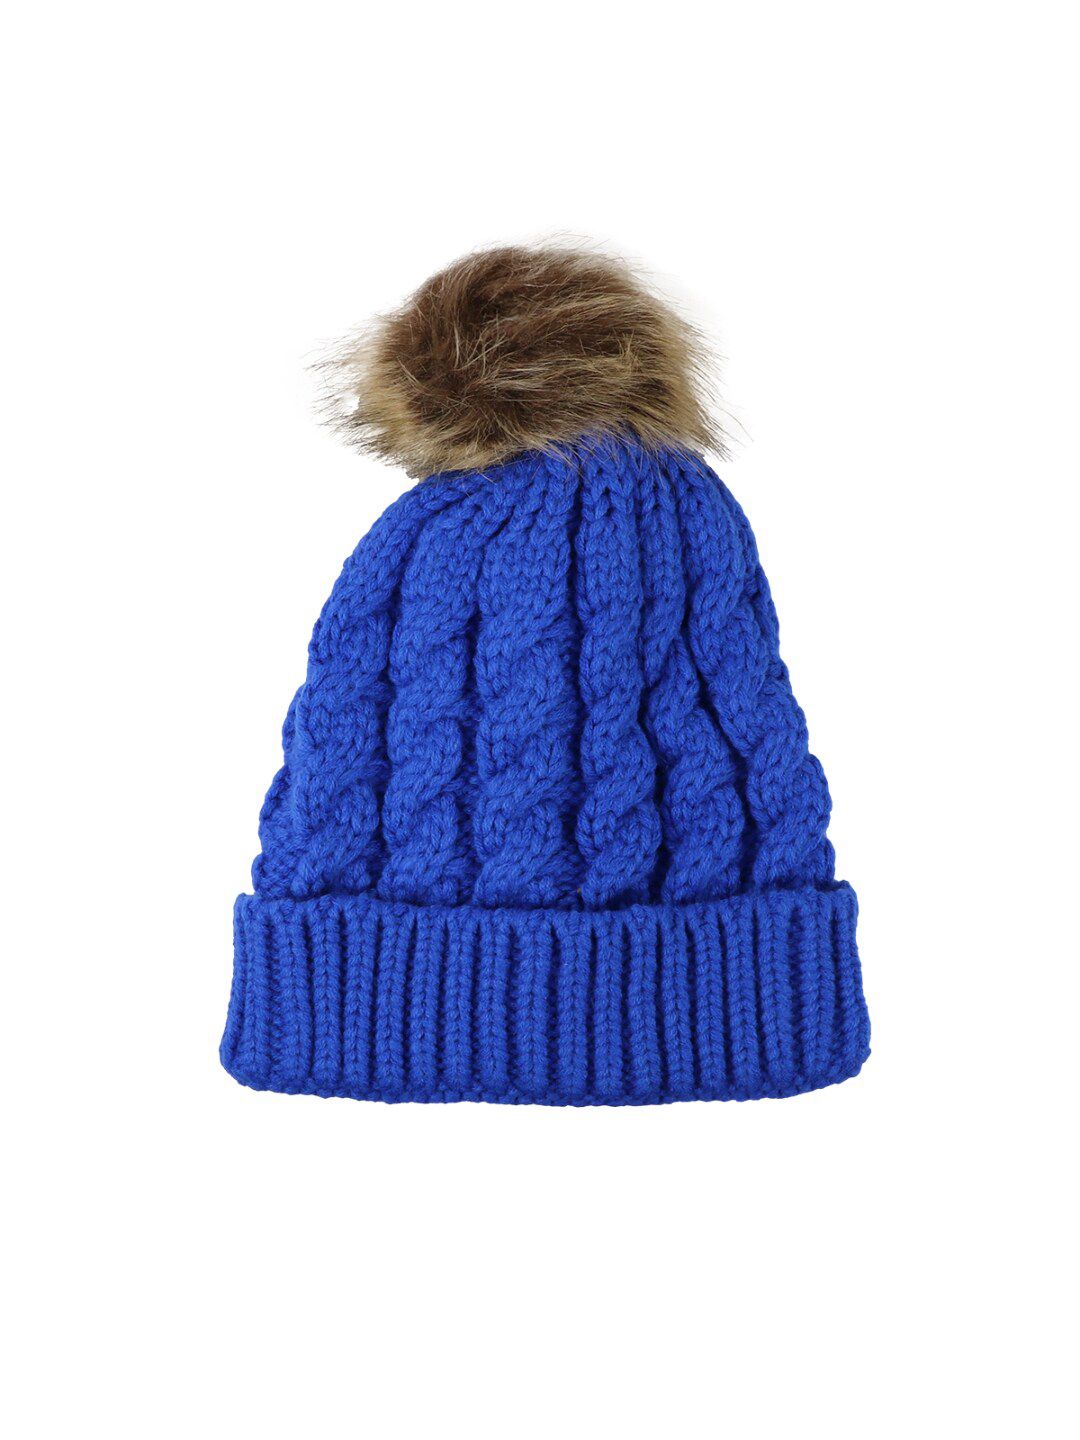 iSWEVEN Unisex Blue & Brown Beanie Price in India